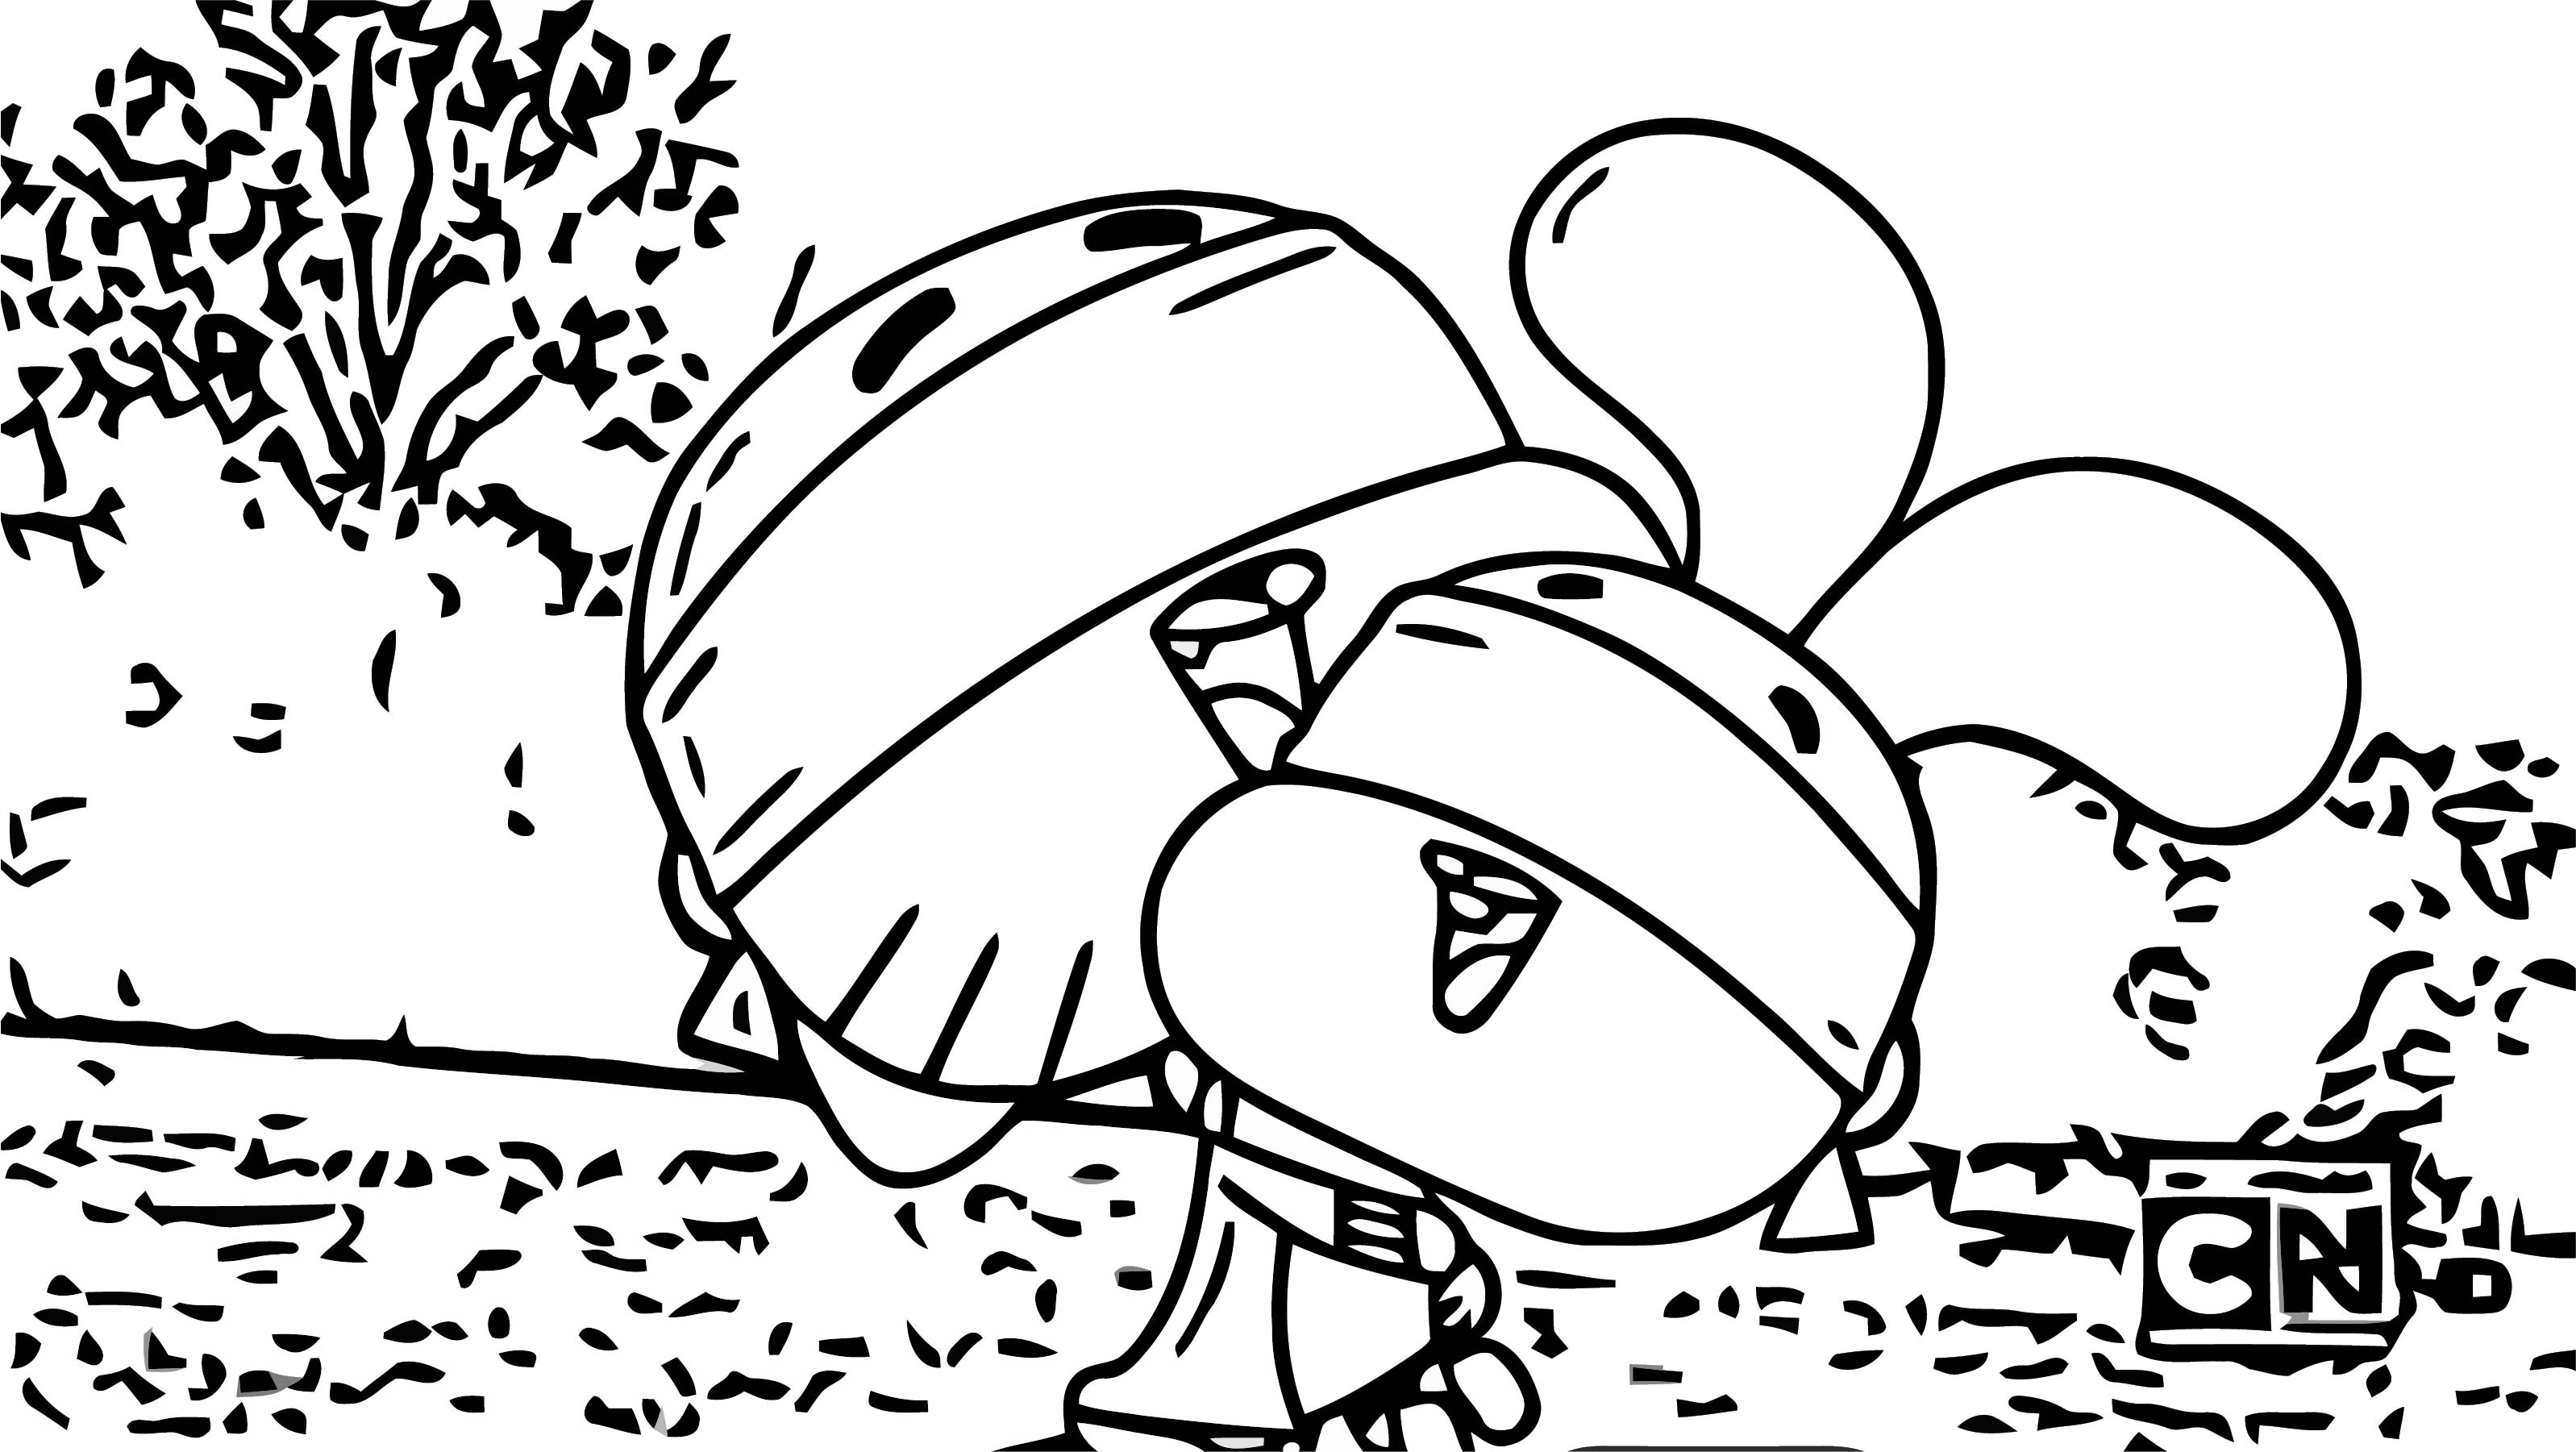 Gumball Anais The Goons Coloring Page | Wecoloringpage.com